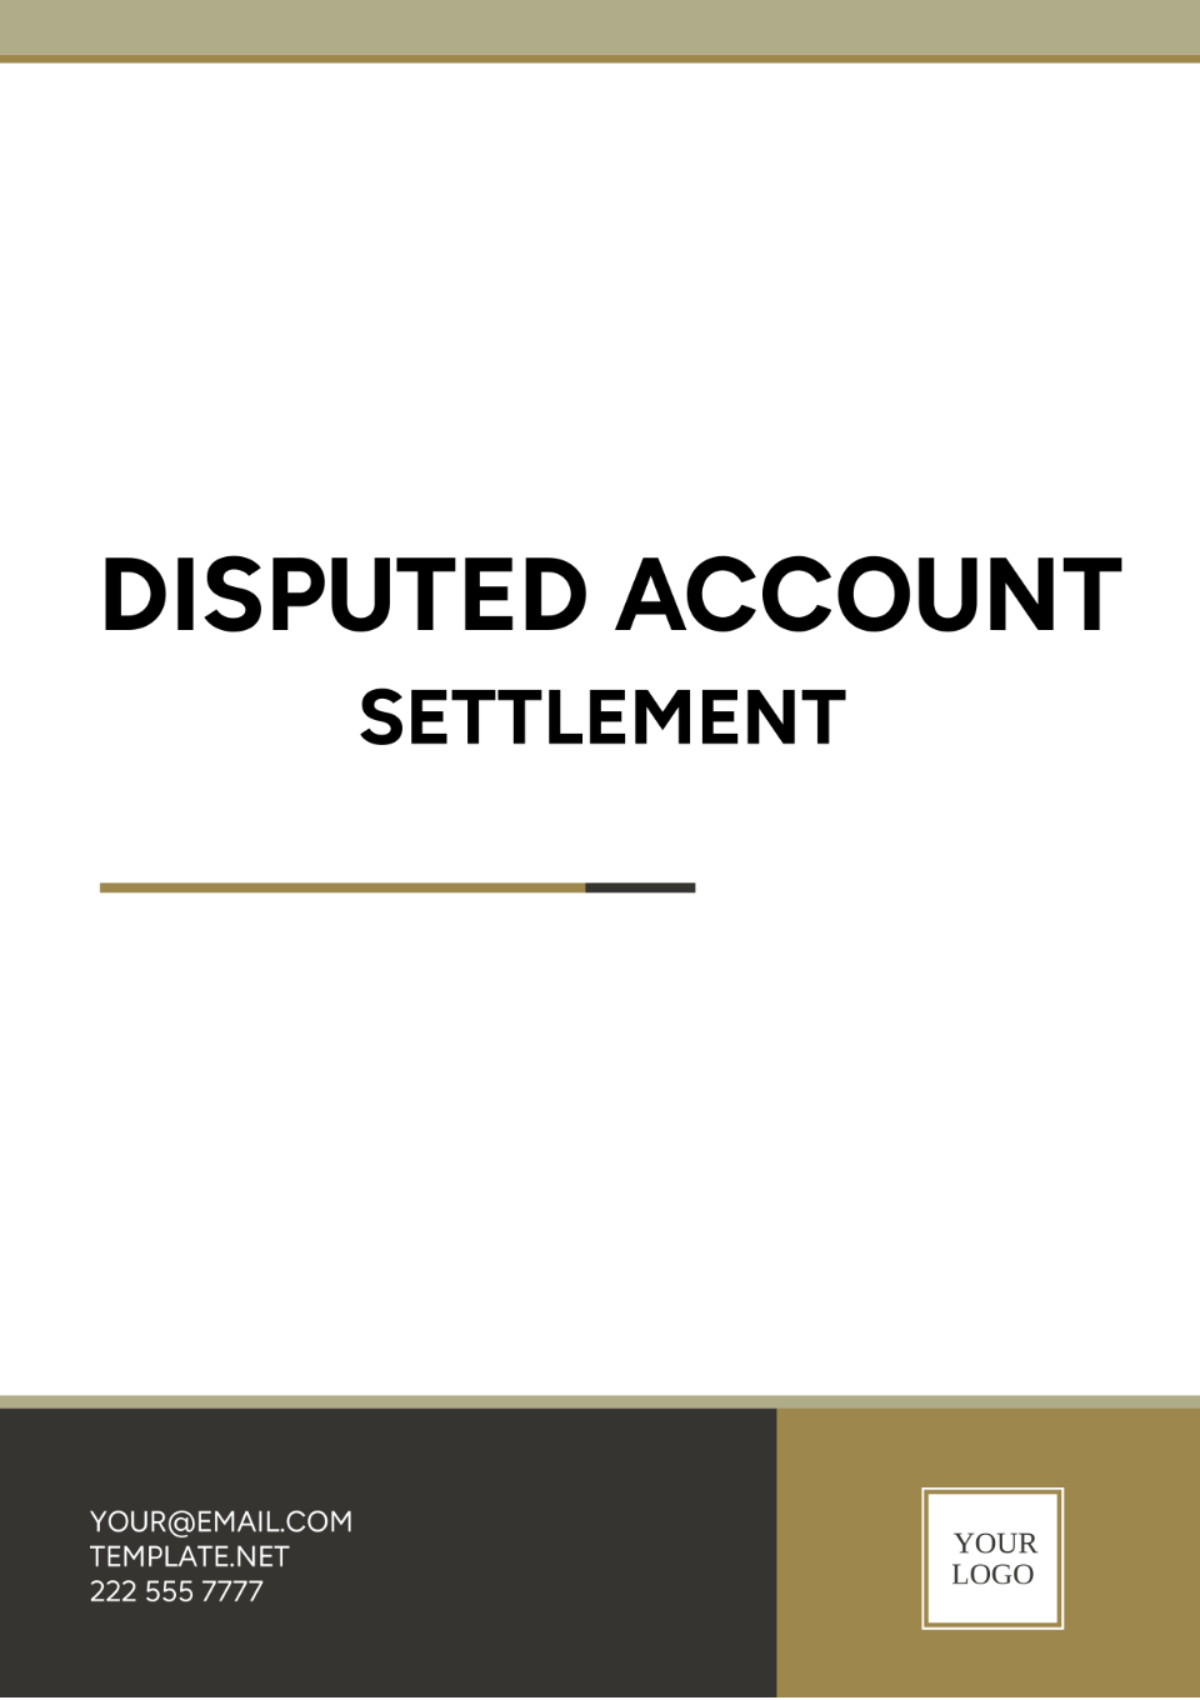 Free Disputed Account Settlement Template